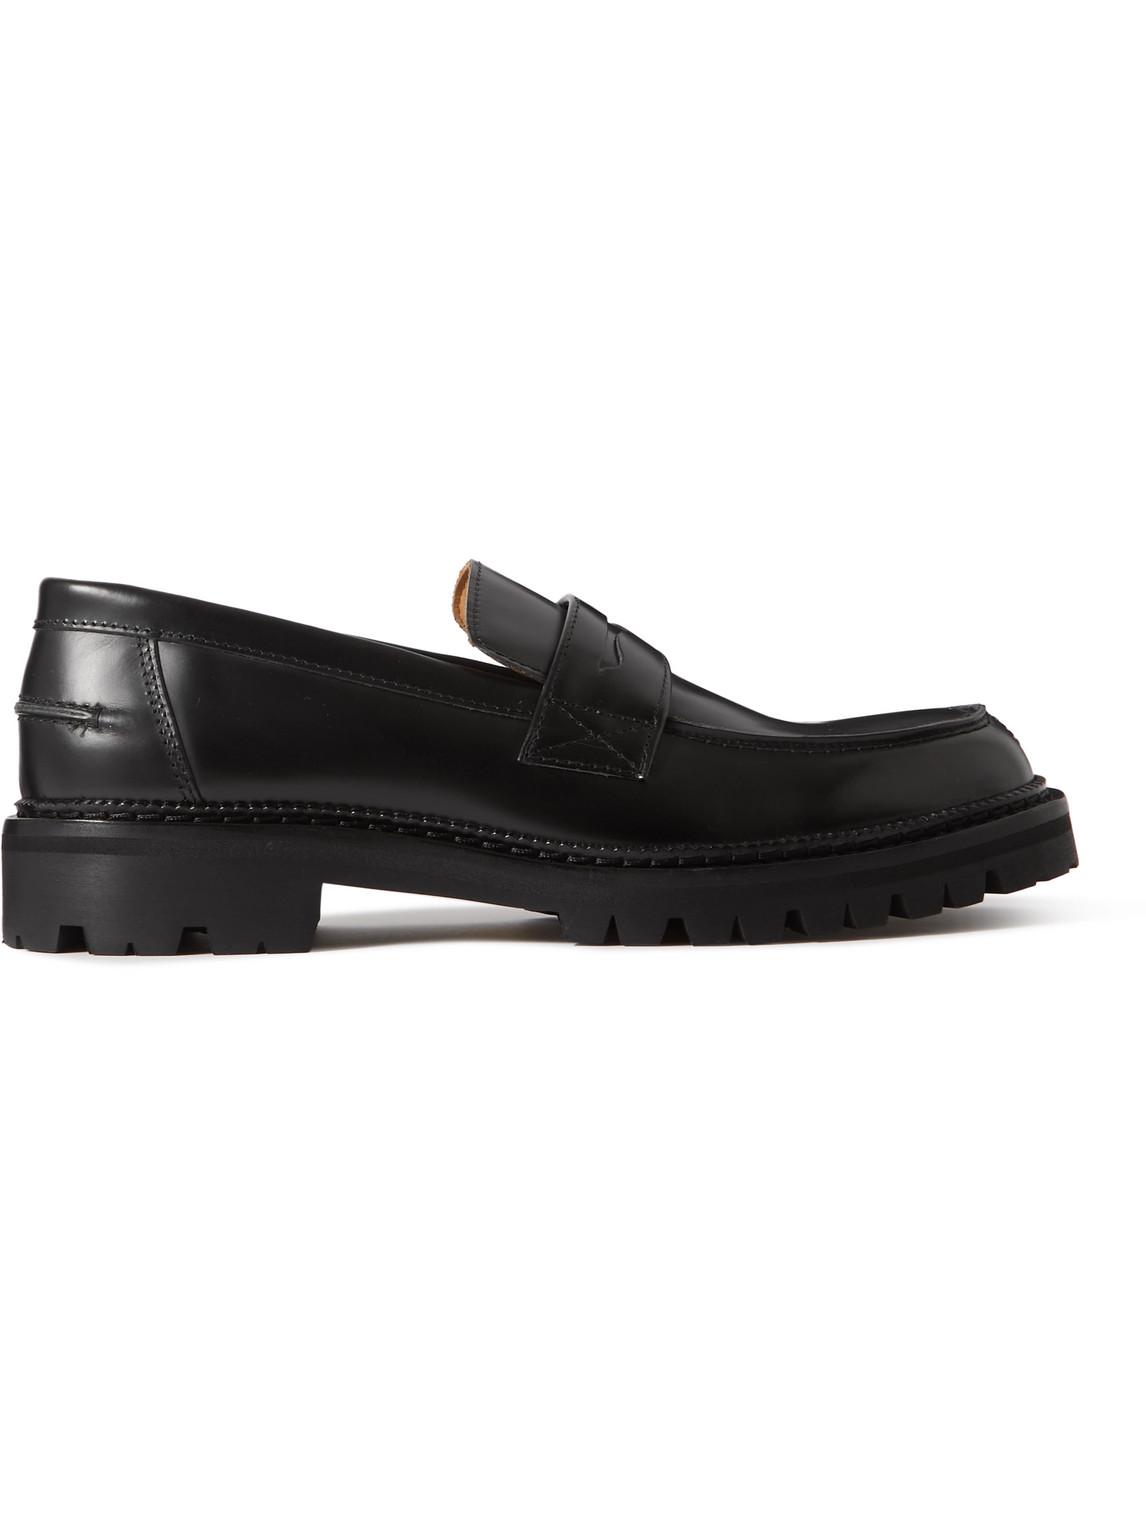 MR P. Jacques Leather Penny Loafers in Black for Men | Lyst